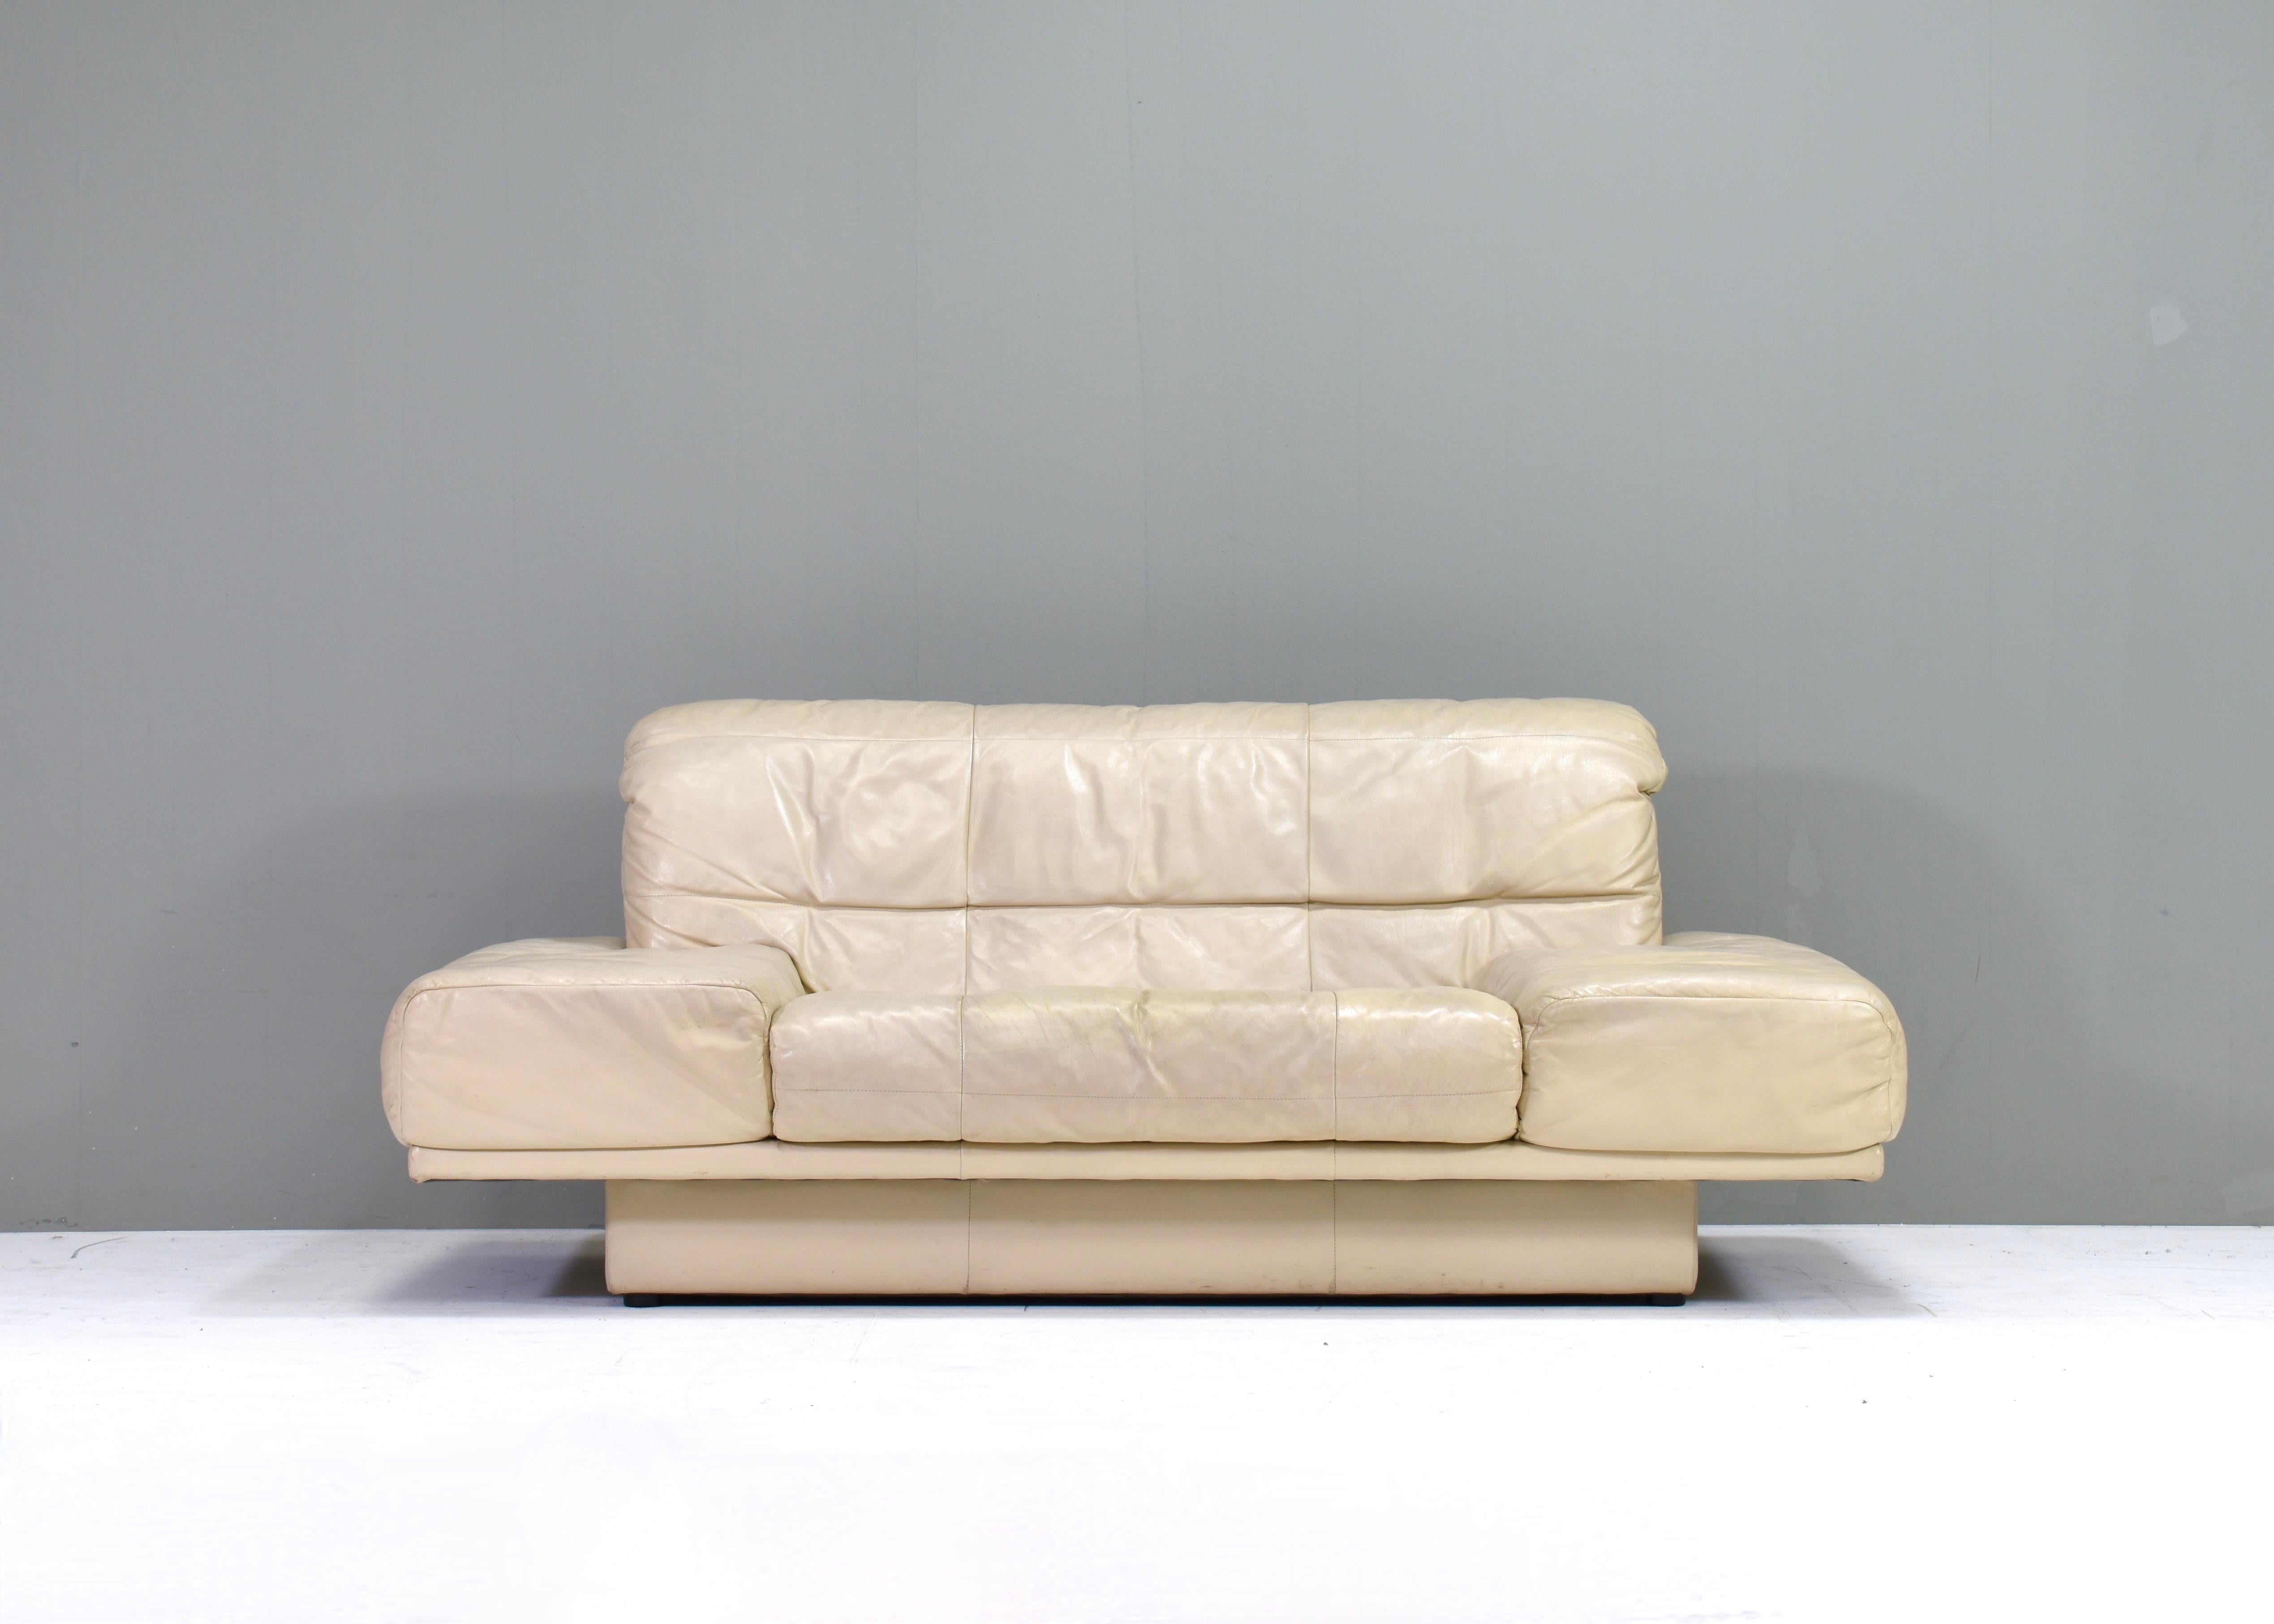 Rolf Benz 2-seat sofa in ivory cream colored leather. Also sold separate.

Designer: Unknown
Manufacturer: Rolf Benz
Country: Germany
Model: Sofa
Design period: circa 1980-90
Date of manufacturing: circa 1980-90
Size wdh:
3 seat sofa: 233x87x72 seat